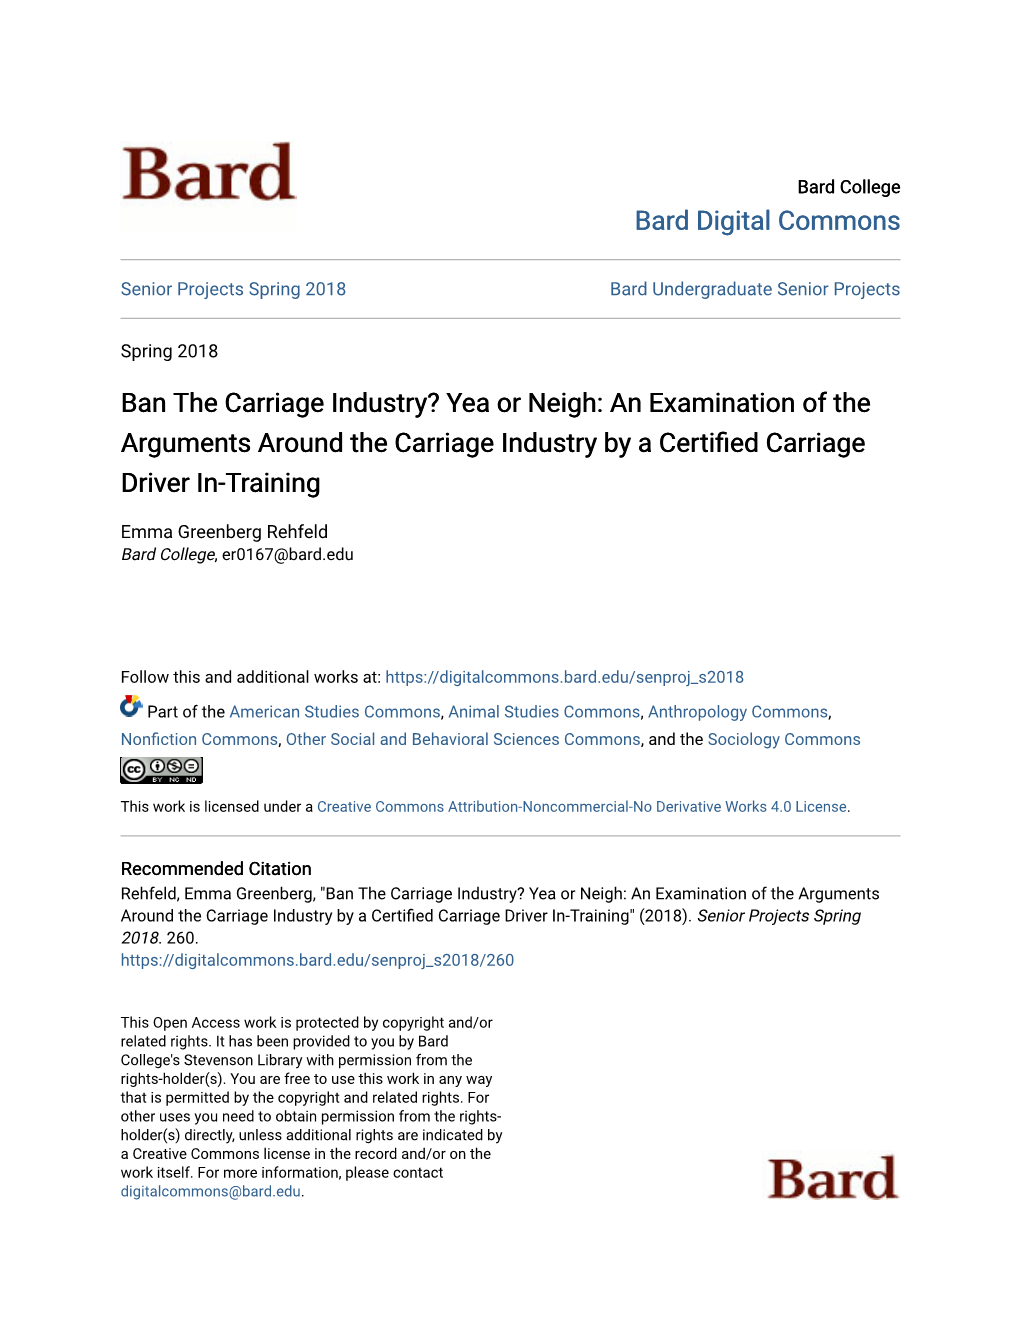 Ban the Carriage Industry? Yea Or Neigh: an Examination of the Arguments Around the Carriage Industry by a Certified Carriage Driver In-Training